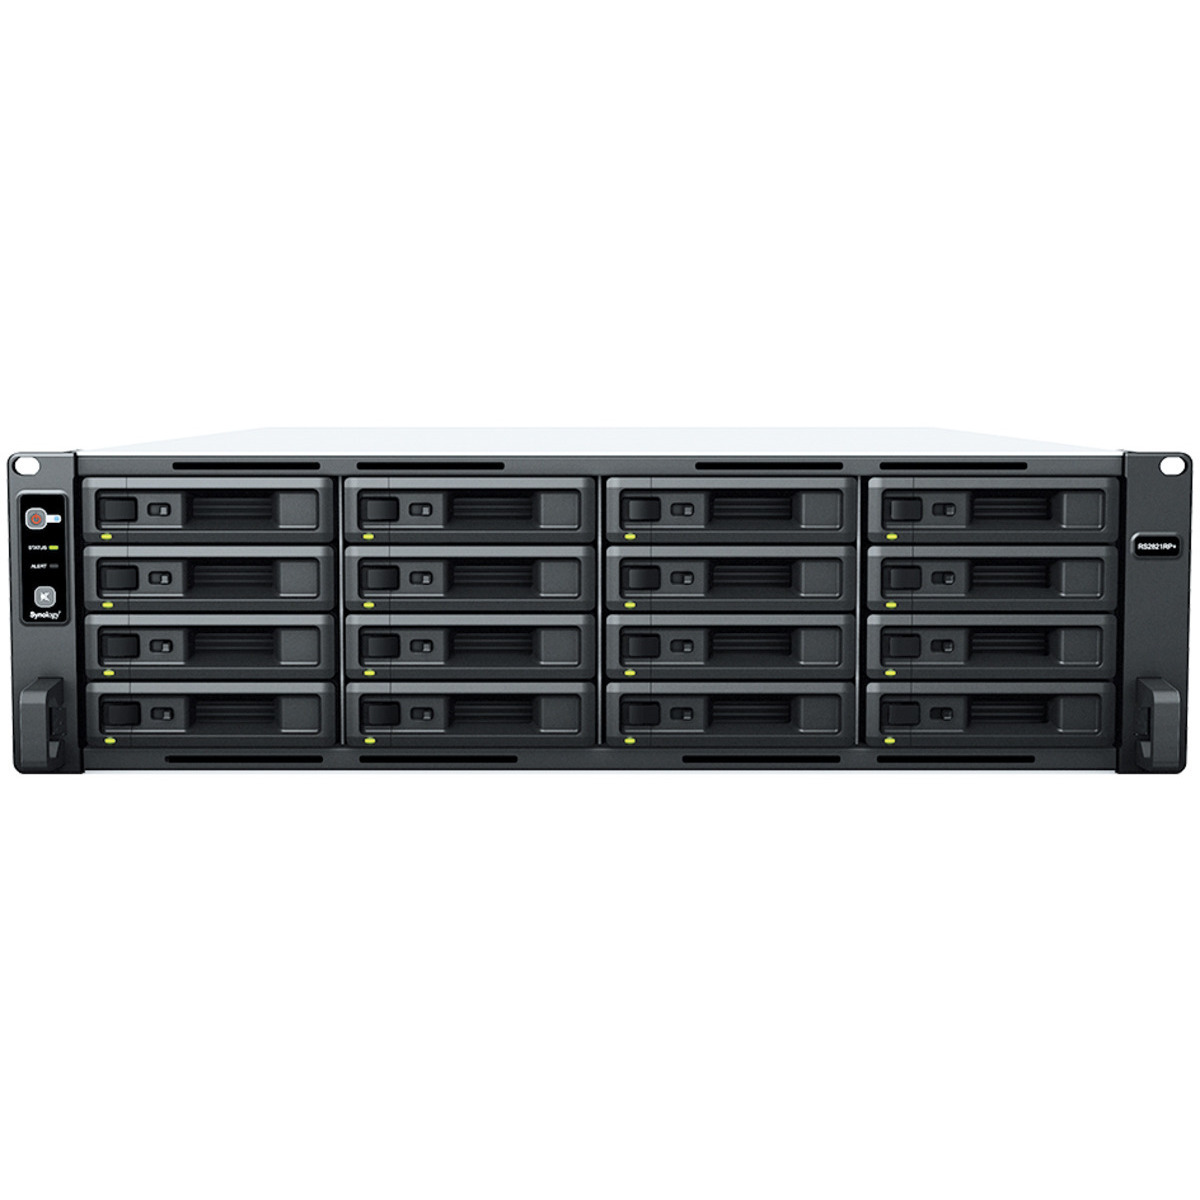 Synology RackStation RS2821RP+ 120tb 16-Bay RackMount Large Business / Enterprise NAS - Network Attached Storage Device 15x8tb Western Digital Red Pro WD8005FFBX 3.5 7200rpm SATA 6Gb/s HDD NAS Class Drives Installed - Burn-In Tested RackStation RS2821RP+